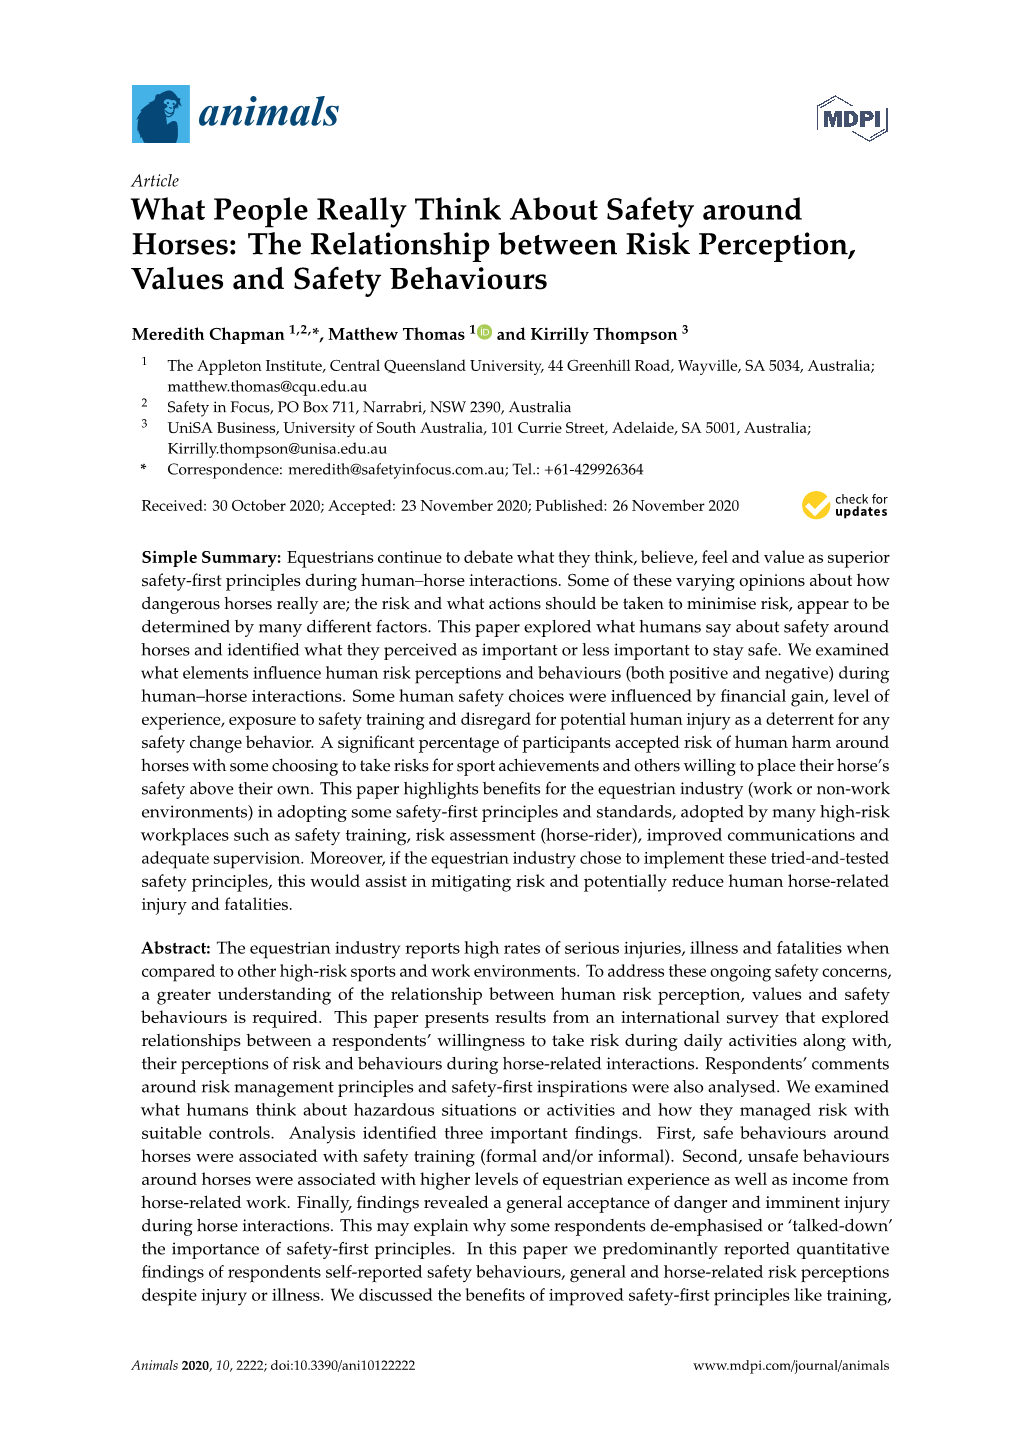 What People Really Think About Safety Around Horses: the Relationship Between Risk Perception, Values and Safety Behaviours